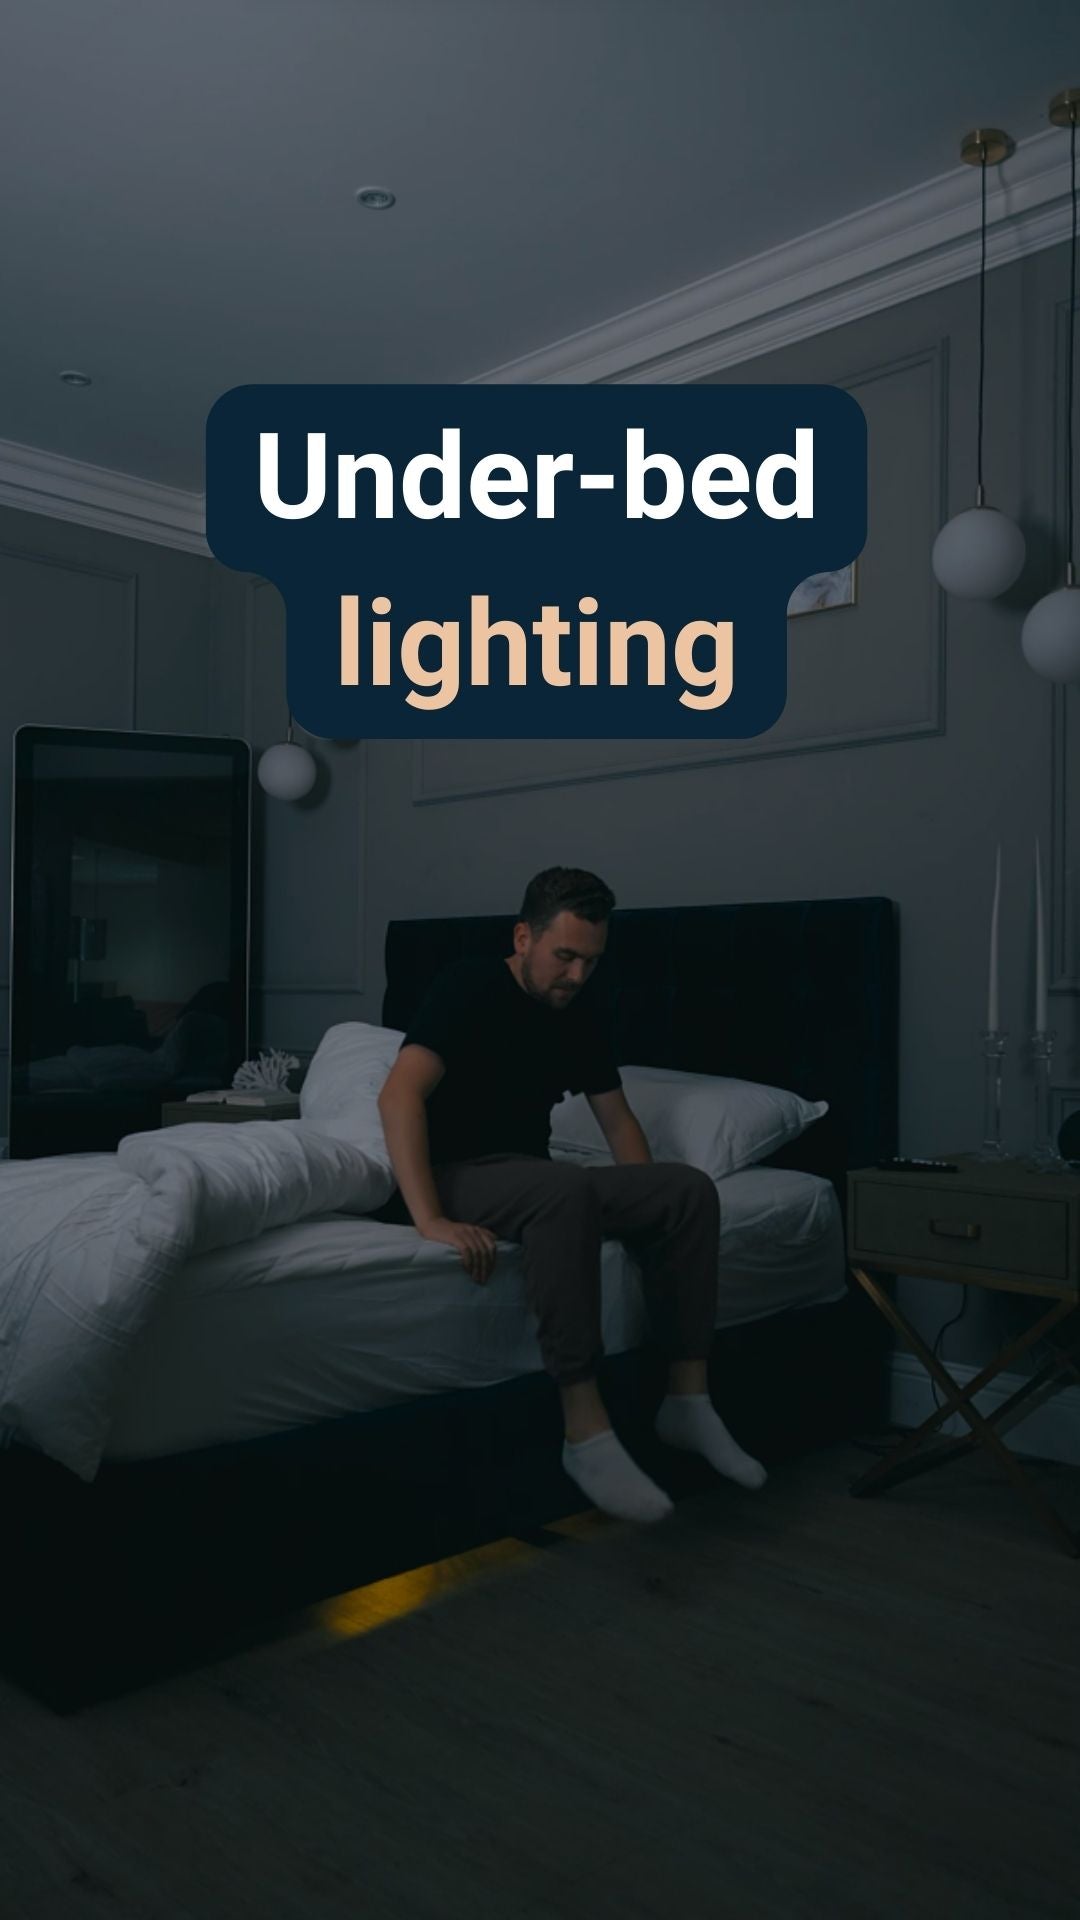 A man getting out of bed with underbed lighting, with the caption 'Under-bed lighting'